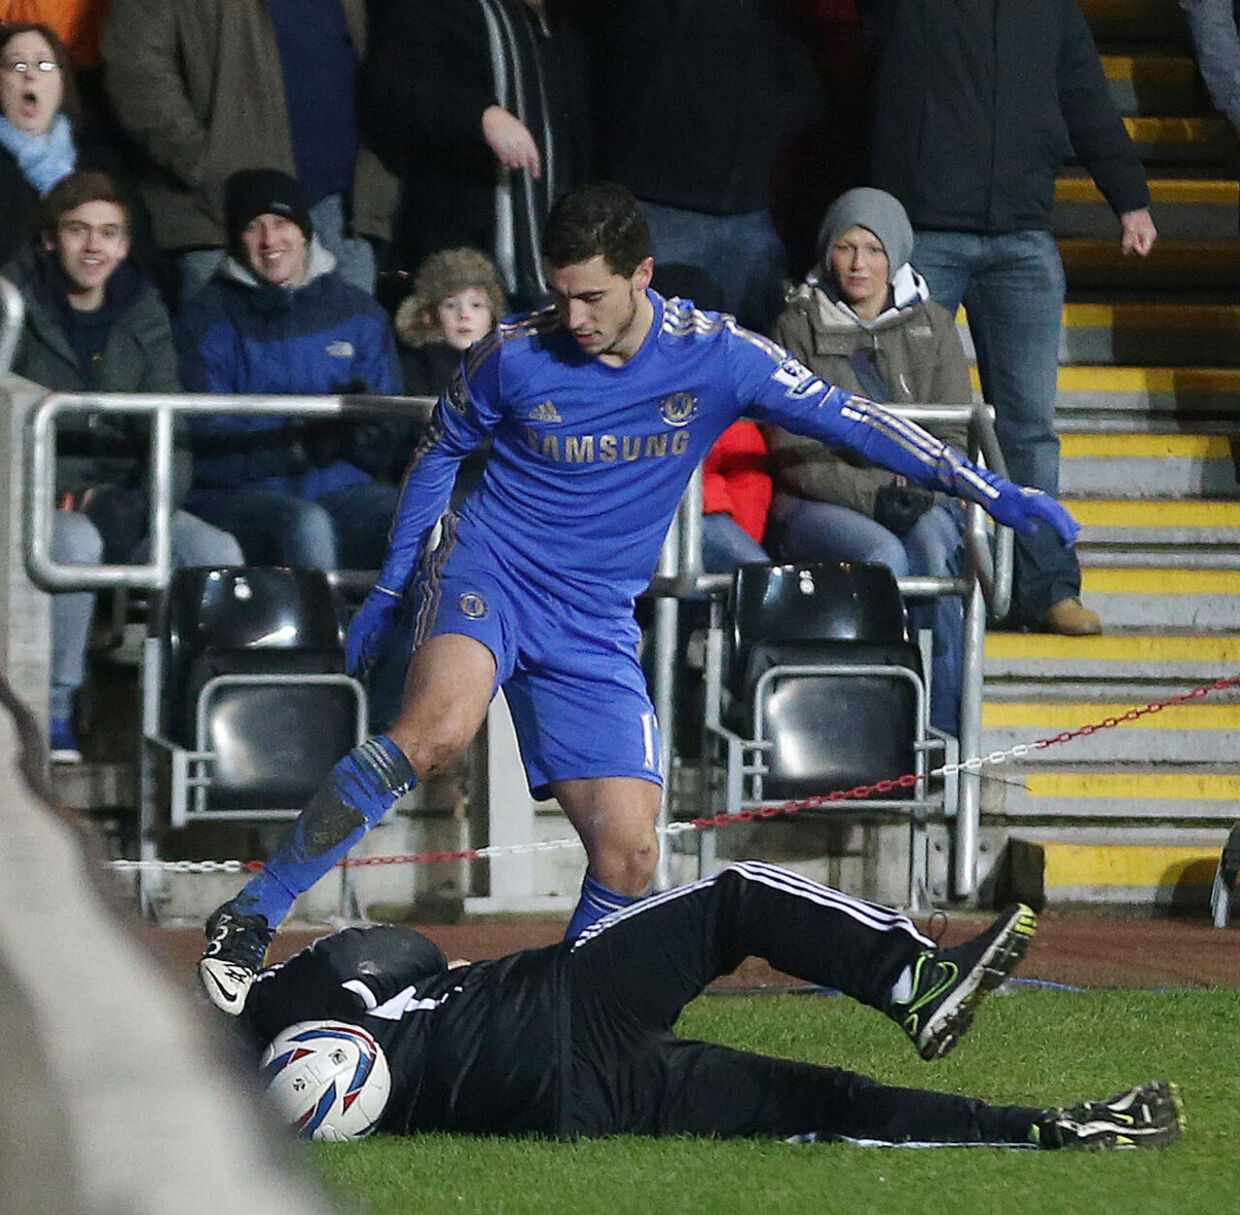 Football - Swansea City v Chelsea - Capital One Cup Semi Final Second Leg - Liberty Stadium - 23/1/13 Chelsea's Eden Hazard clashes with a ball boy during the game resulting in Hazard being later sent off Mandatory Credit: Action Images / Carl Recine Livepic